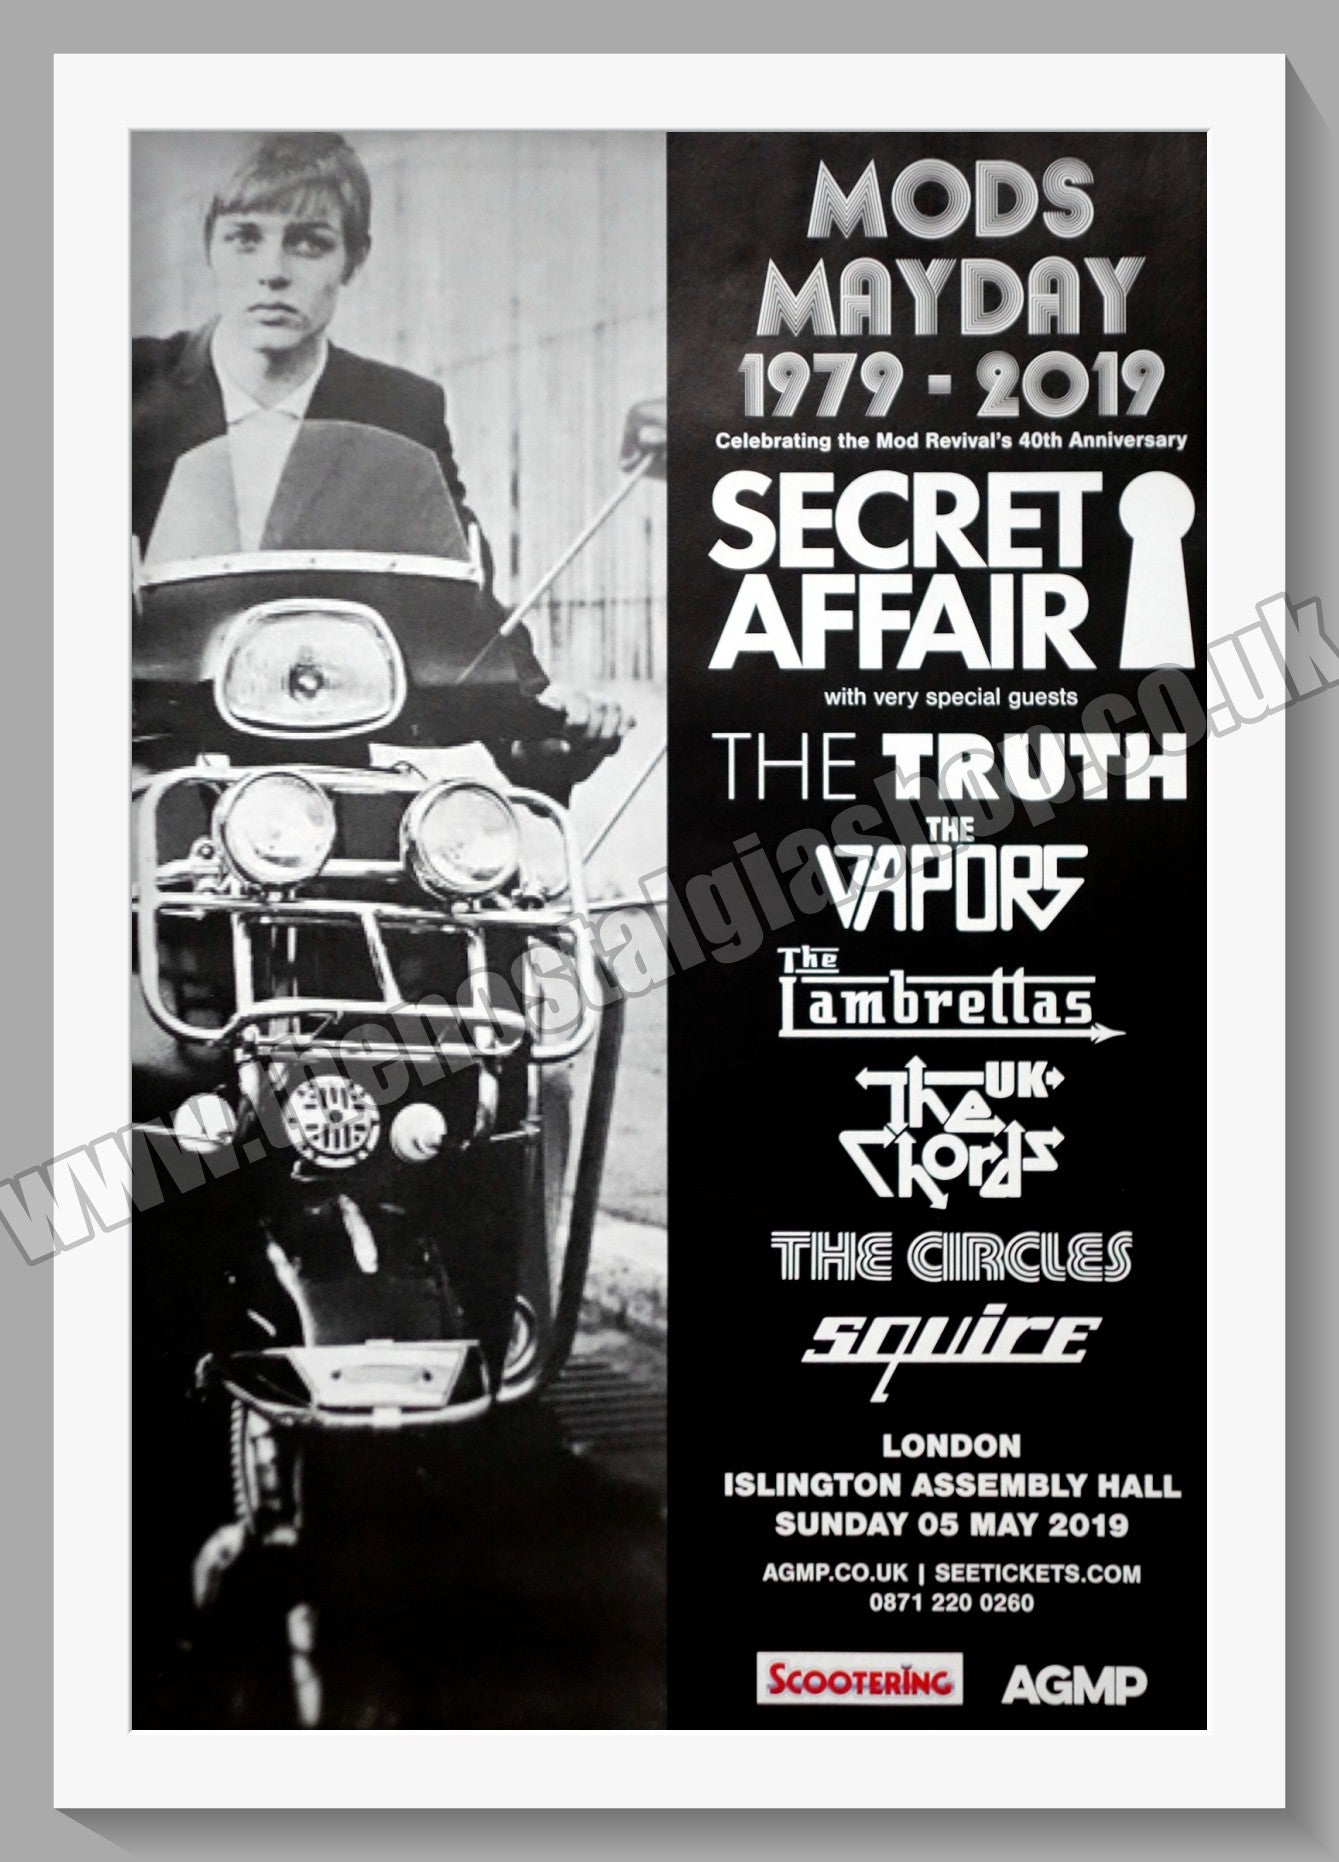 Mods mayday 